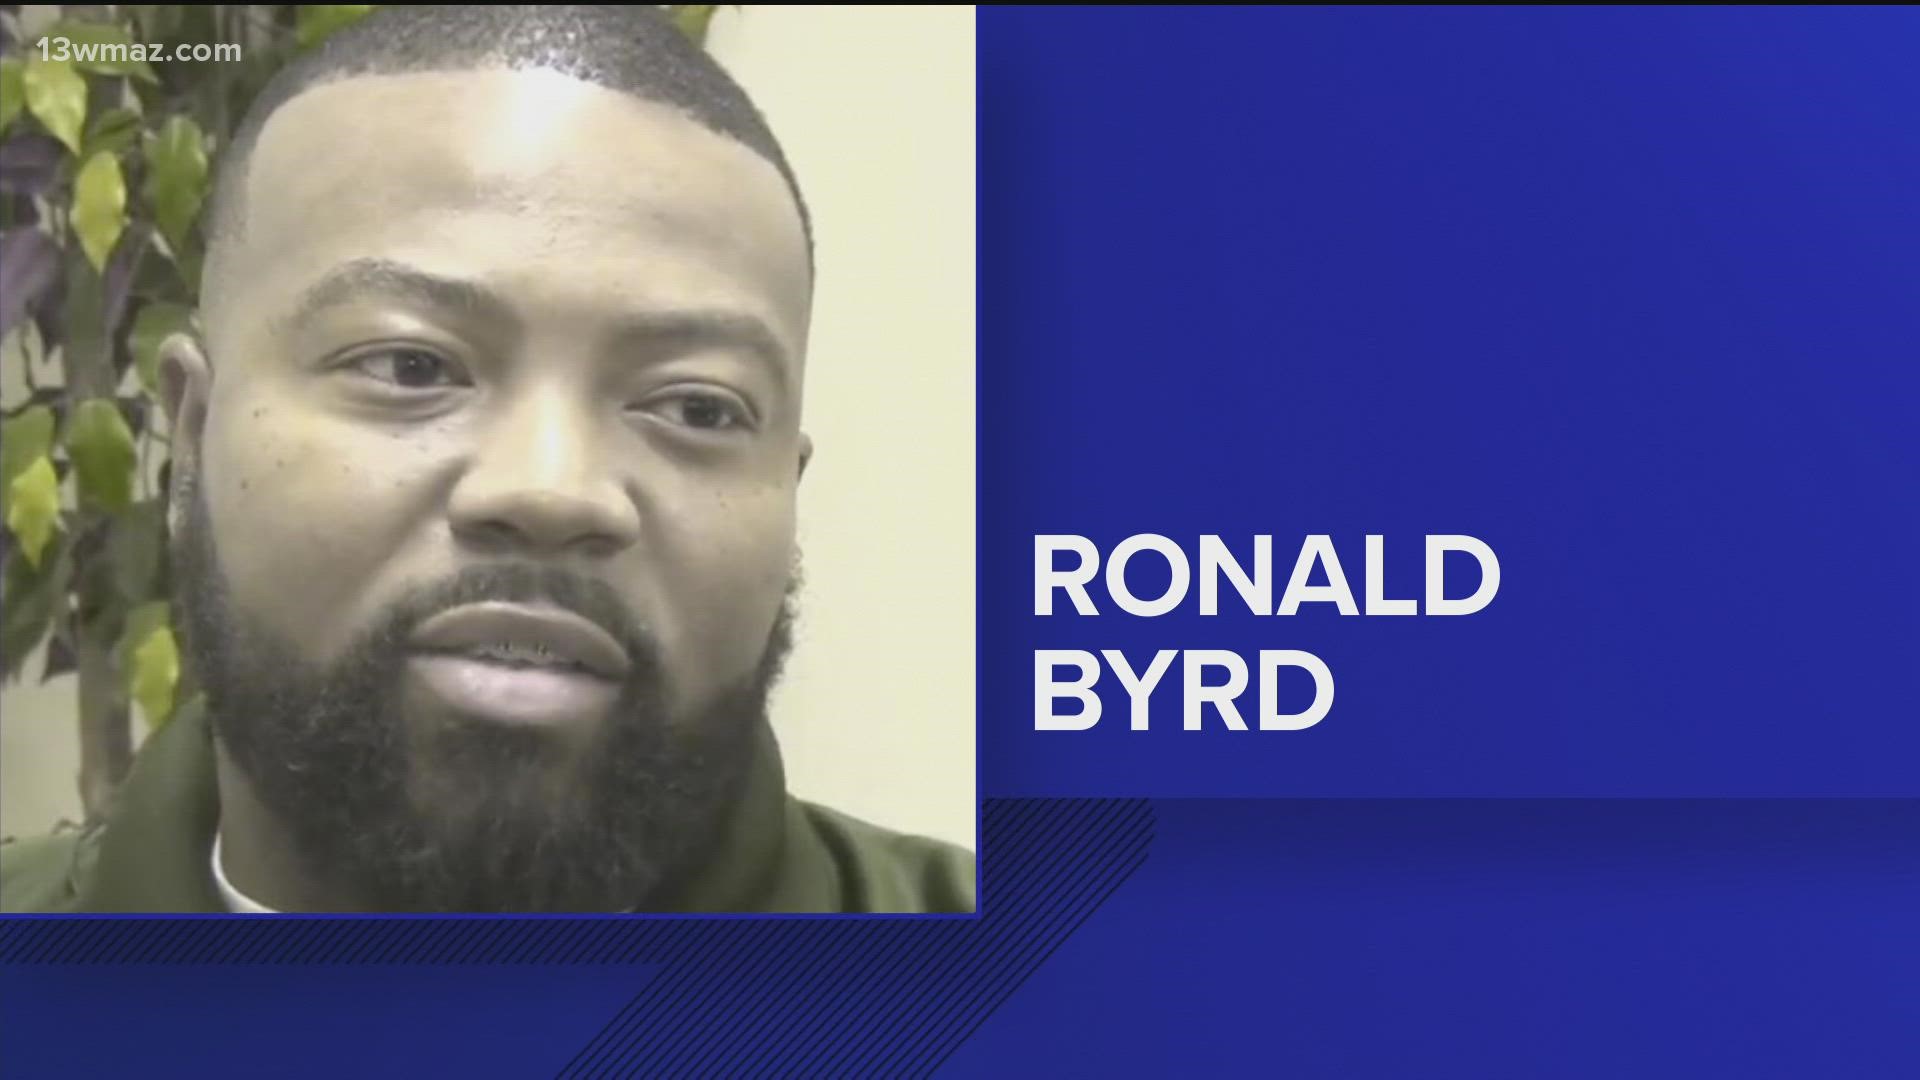 A Warner Robins Police incident report says Ron Byrd was arrested May 12 and charged with terroristic threats and intimidation, a felony.